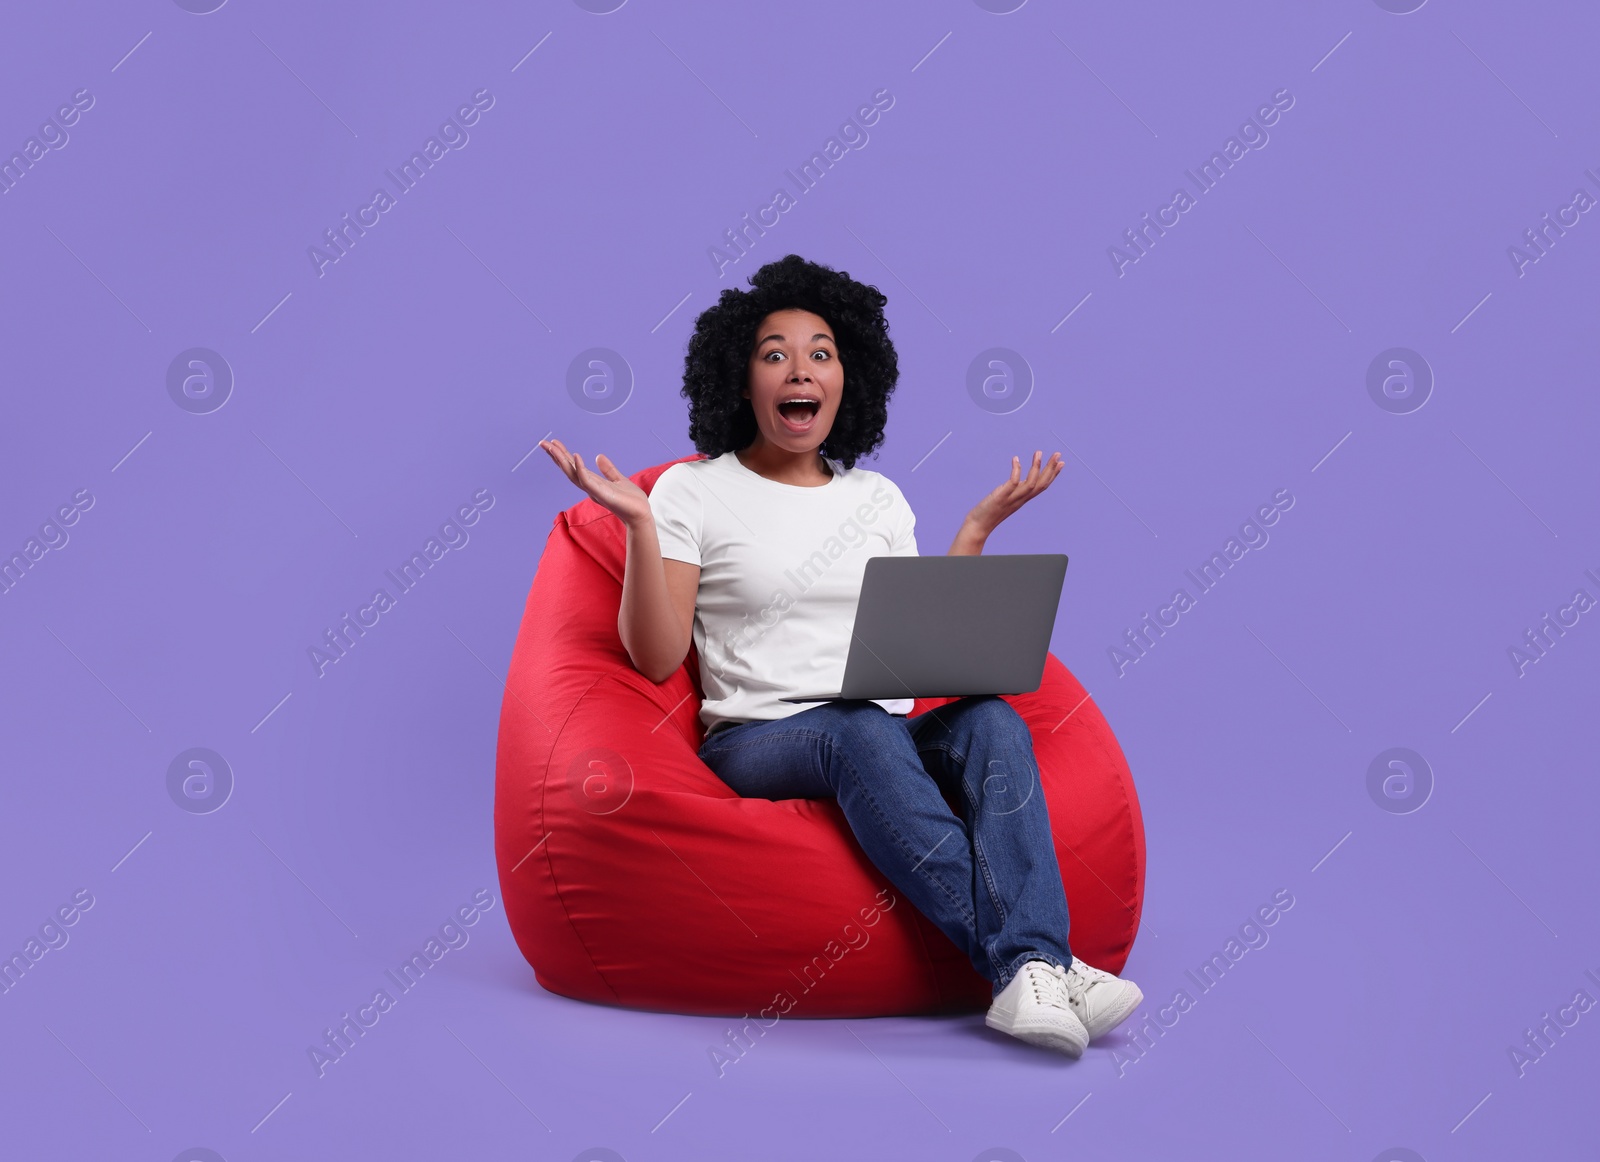 Photo of Emotional young woman with laptop sitting on beanbag chair against purple background